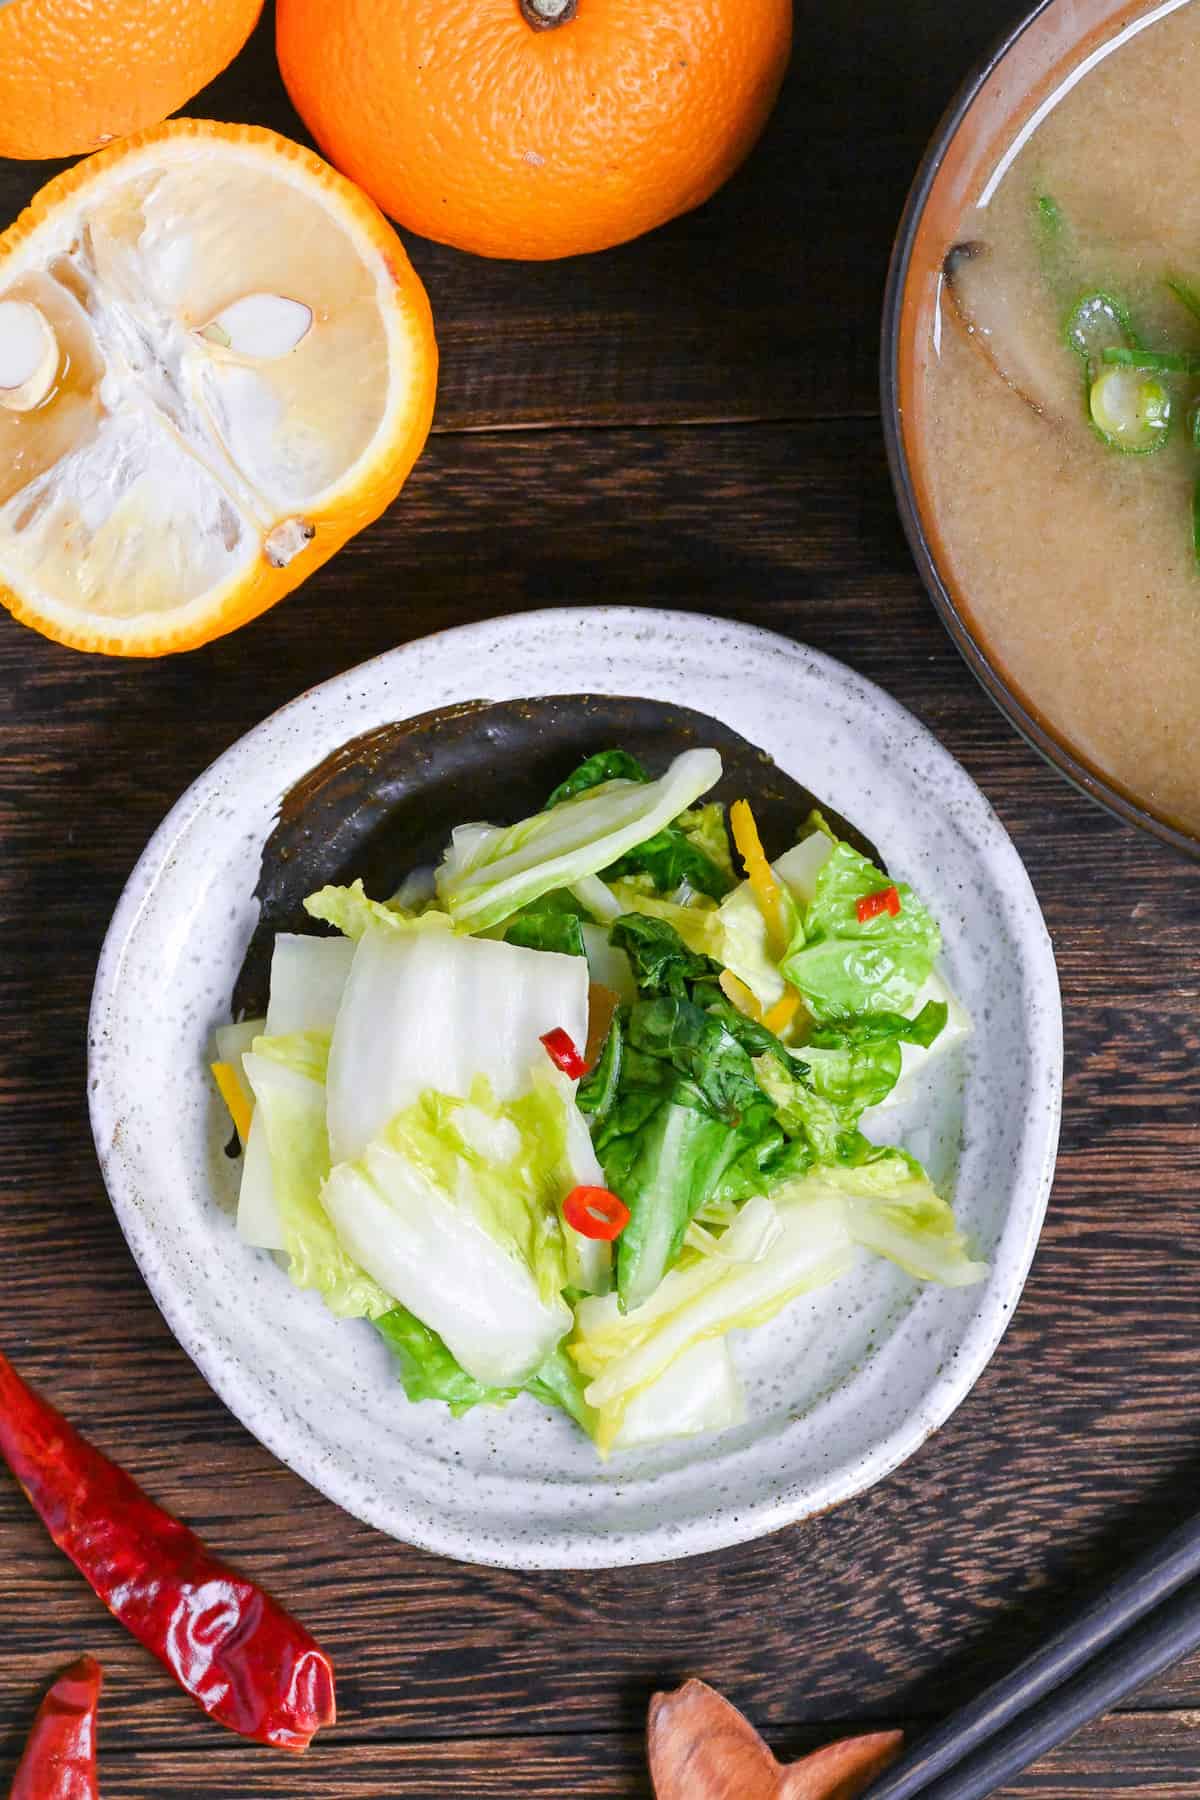 Japanese Napa Cabbage Pickles (Hakusai No Asazuke) on a small white plate with brown brushstroke design next to yuzu citrus and a bowl of miso soup